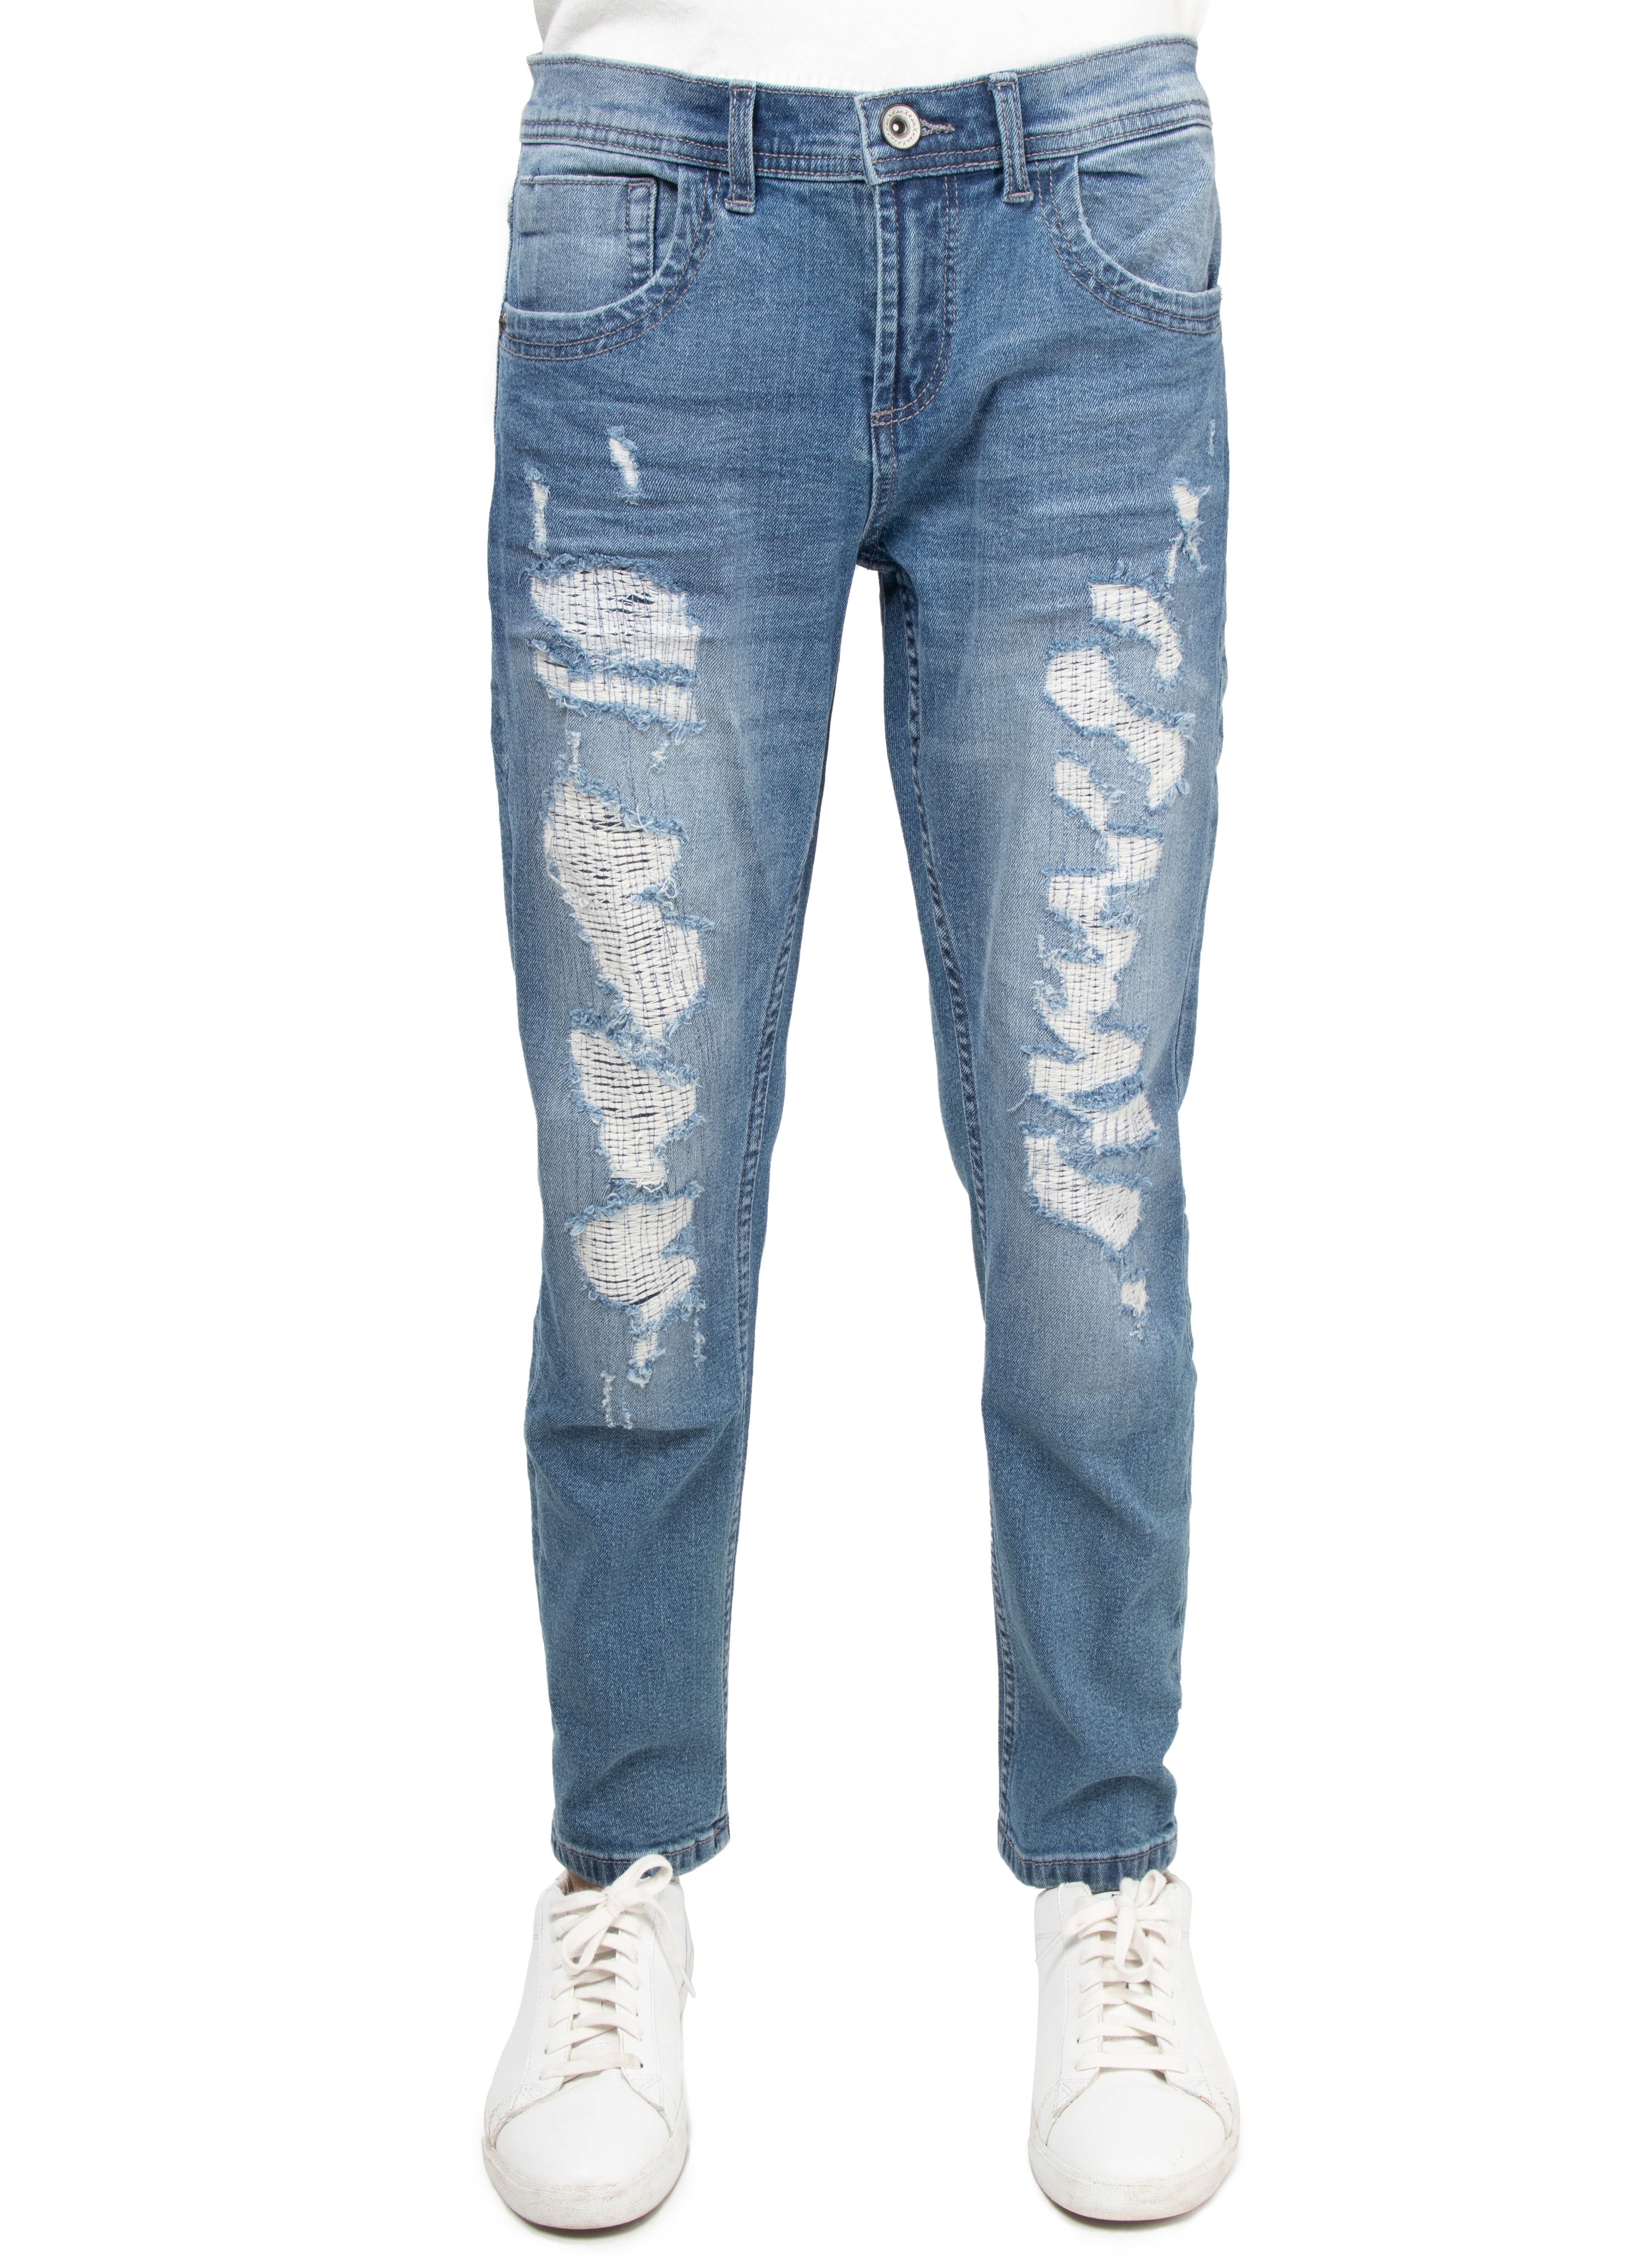 XRay Jeans Cultura Slim Wash Denim Jeans For Boys – X-RAY JEANS